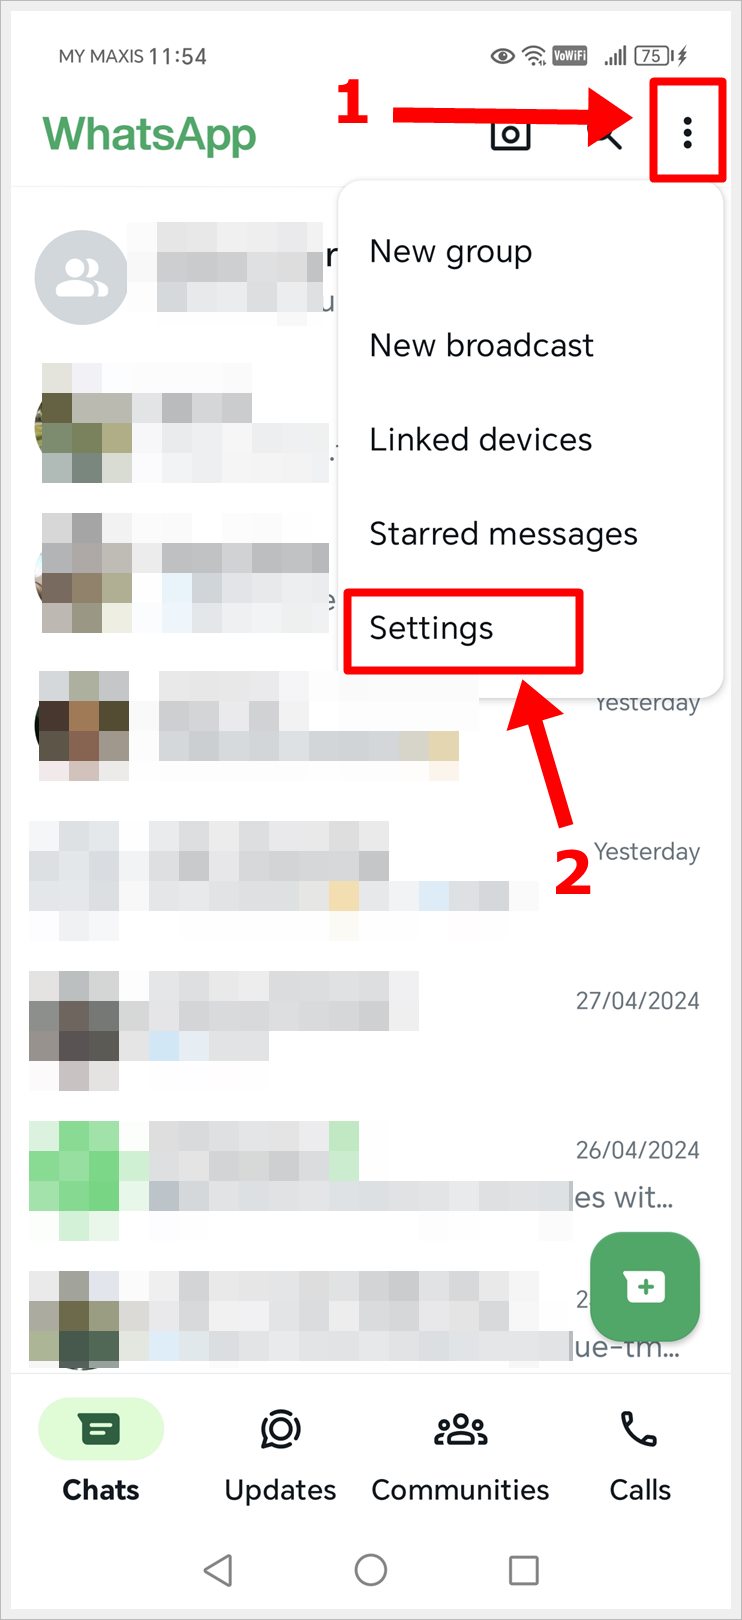 This image shows steps to go to WhatsApp settings by going to 1) The Menu, followed by 2) The 'Settings' option in the menu.